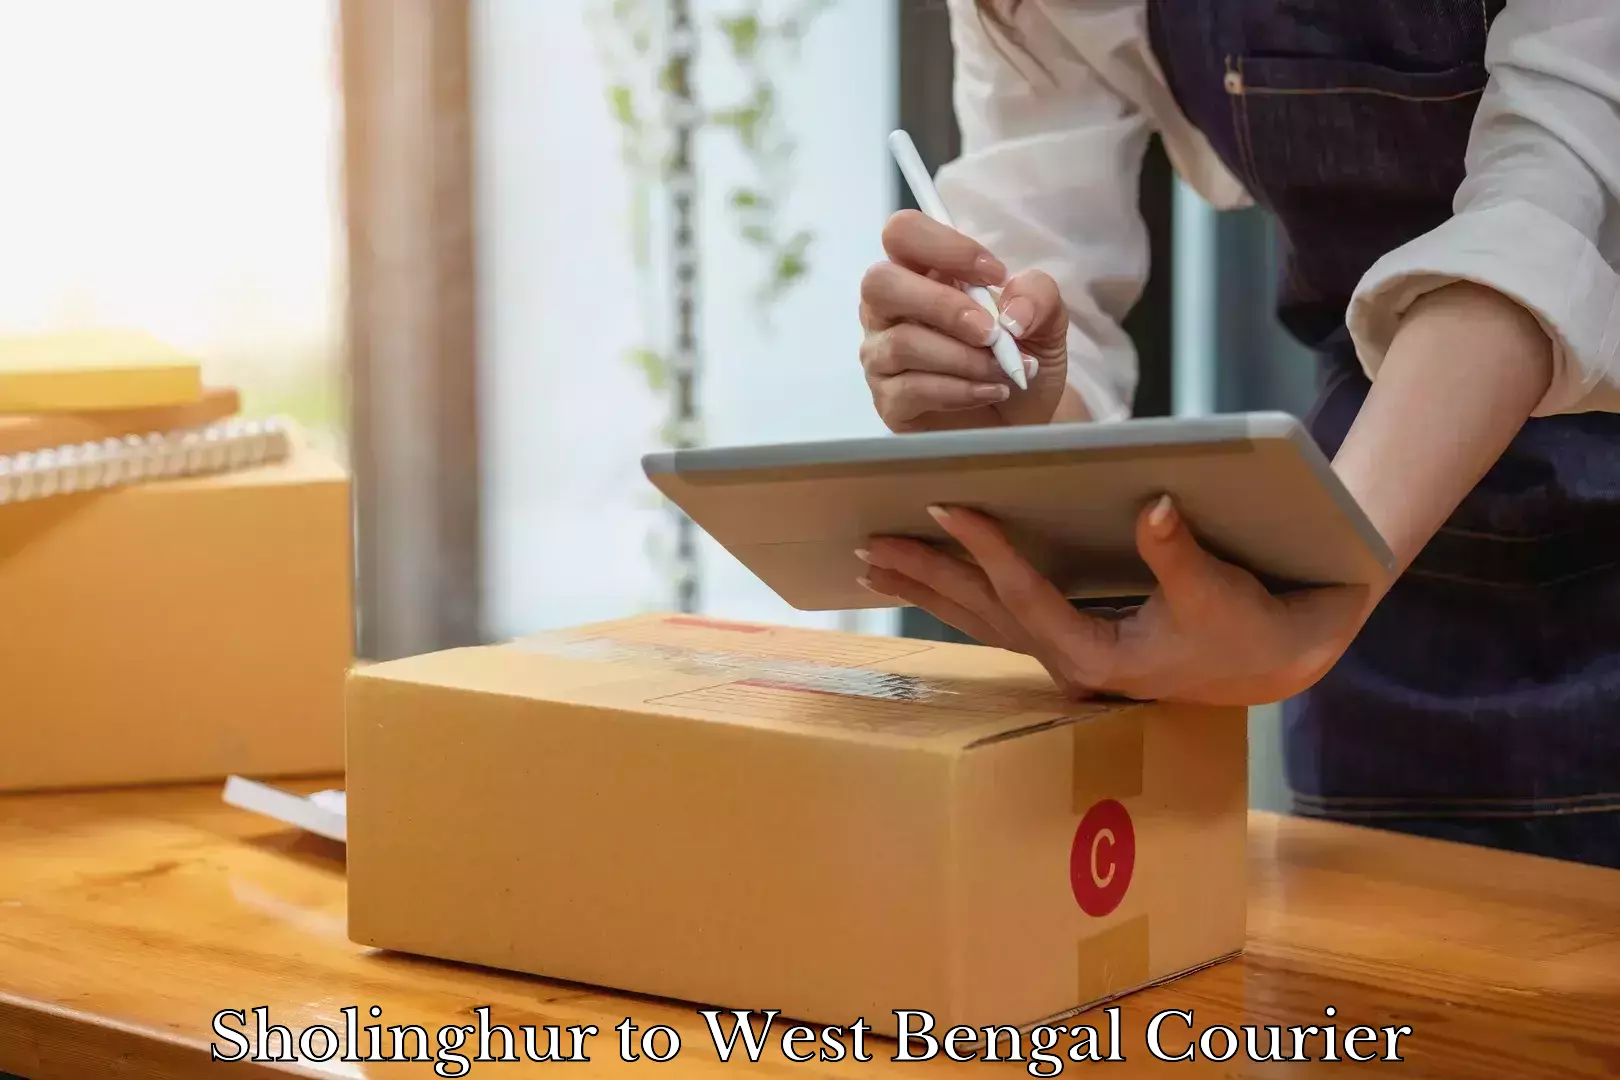 Hassle-free luggage shipping Sholinghur to West Bengal